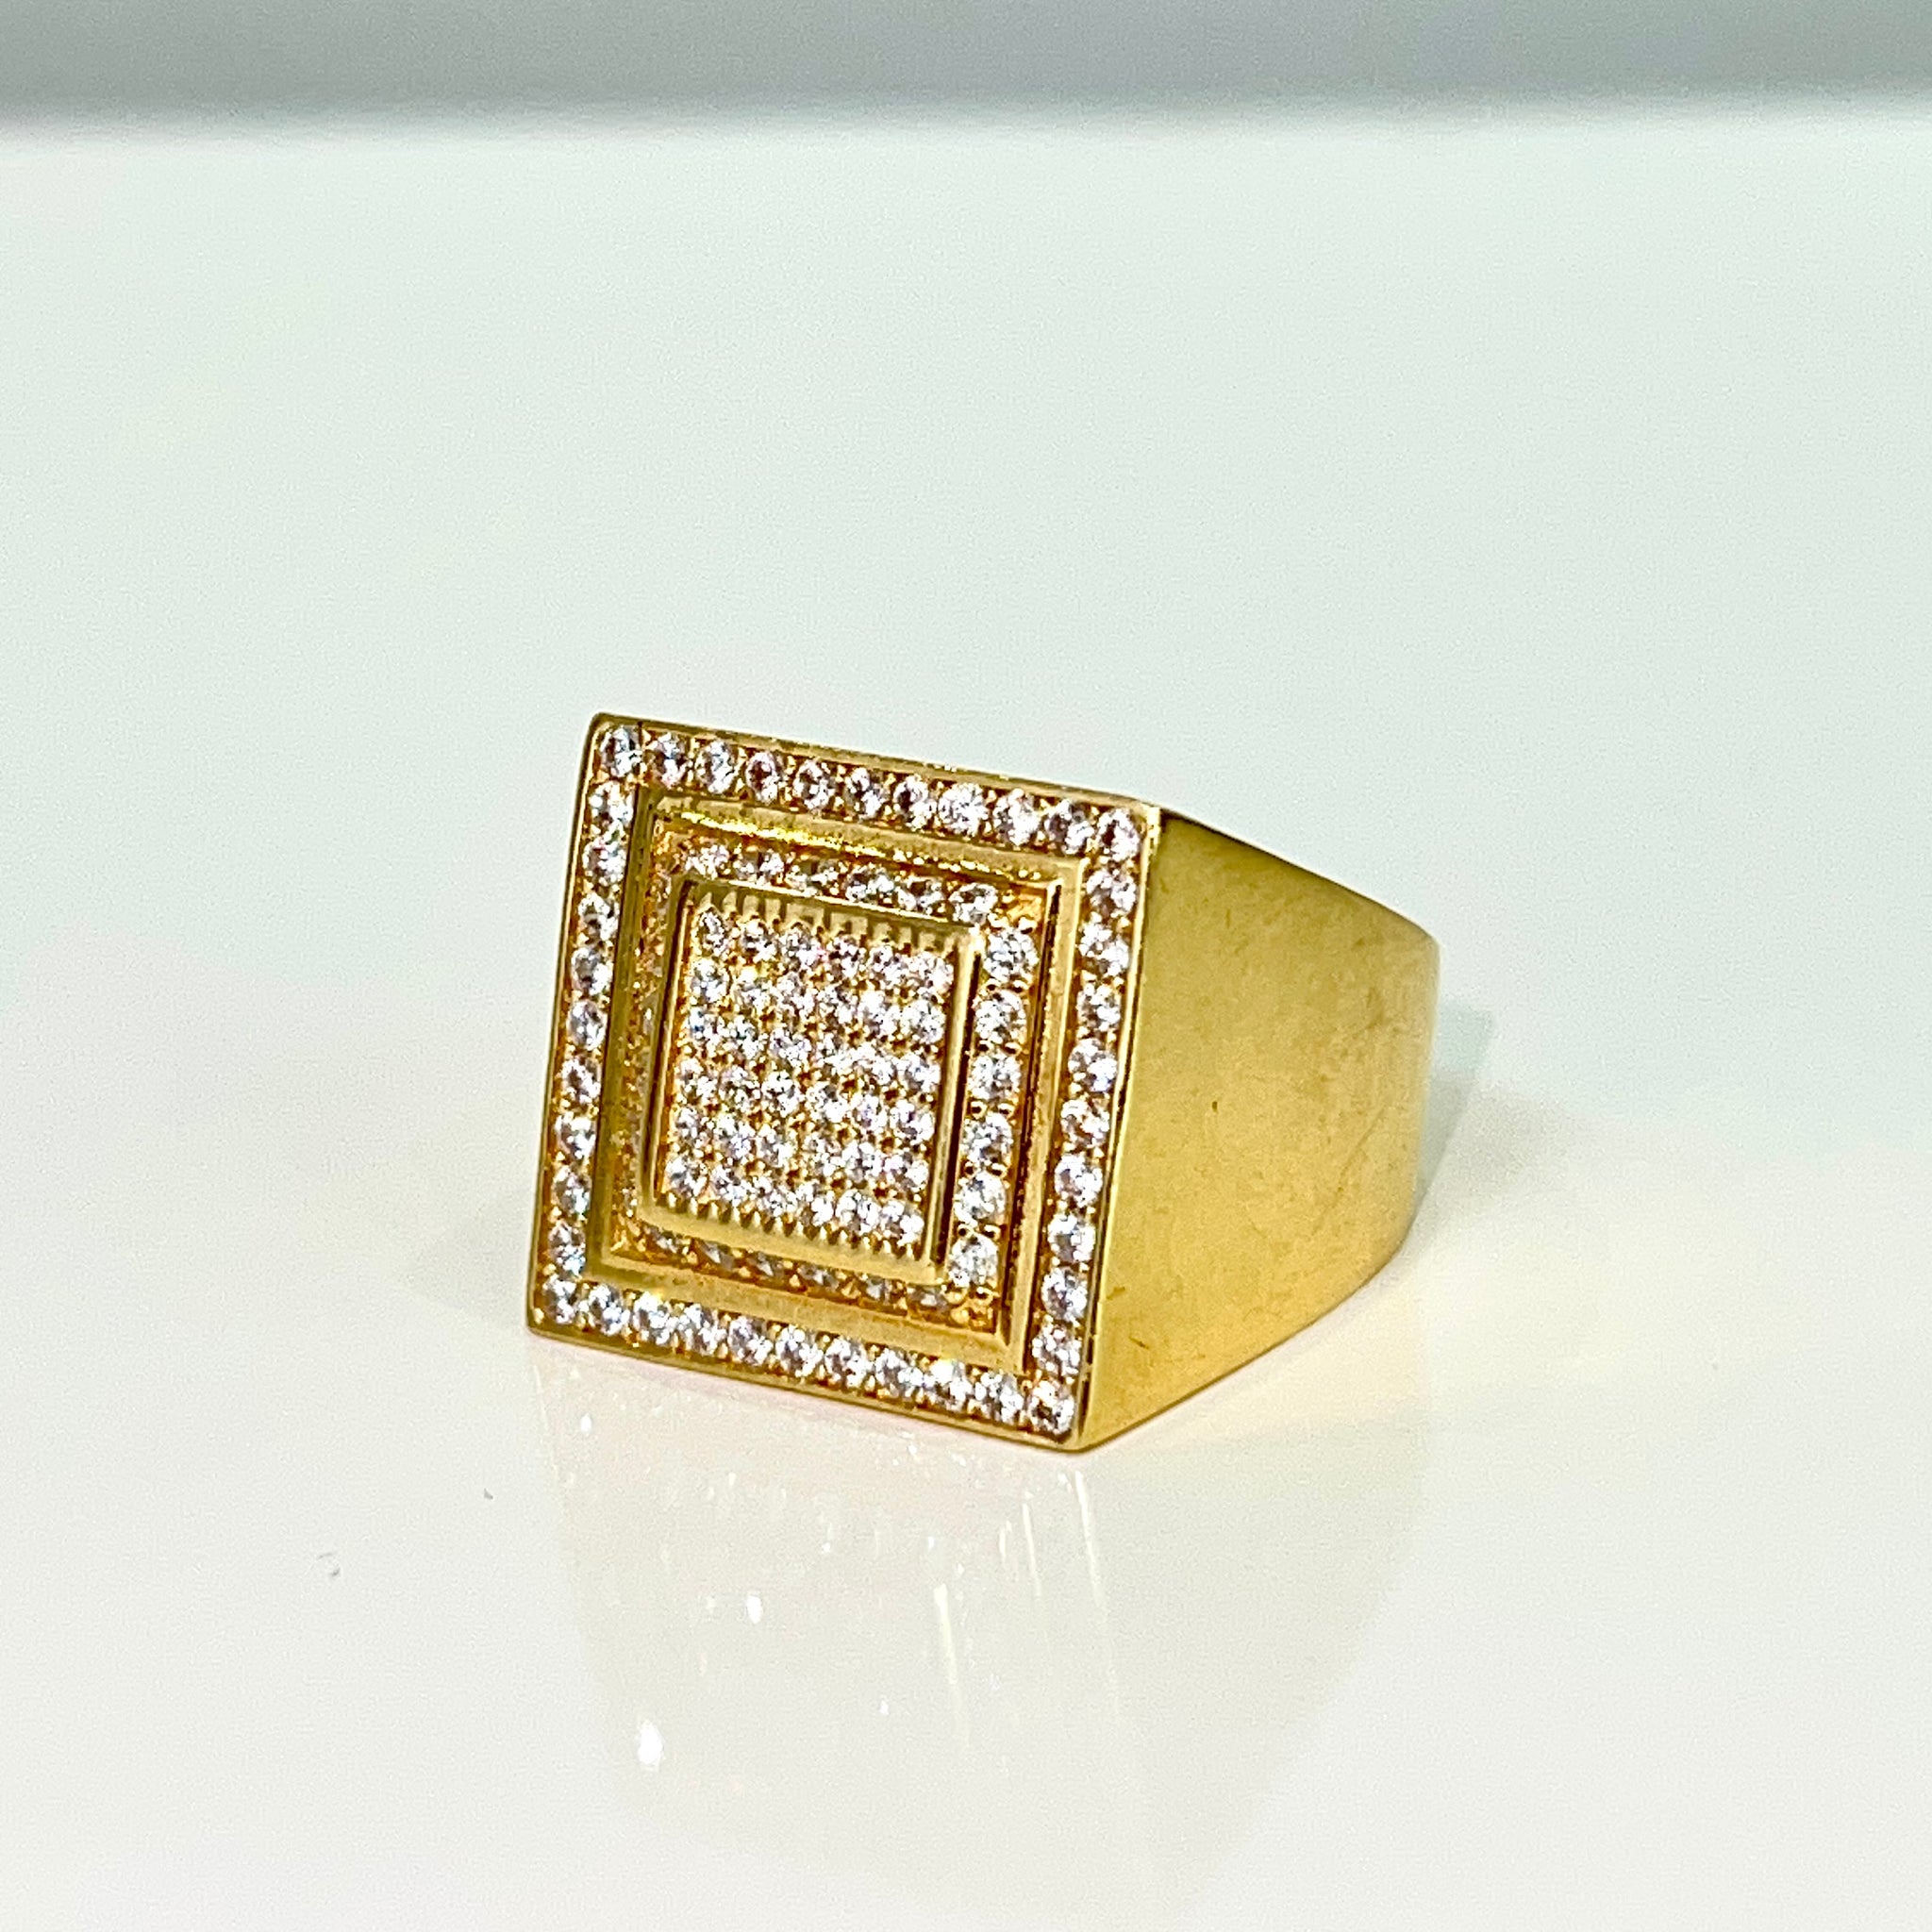 Champions Ring "Iced Out" - 18 carat gold